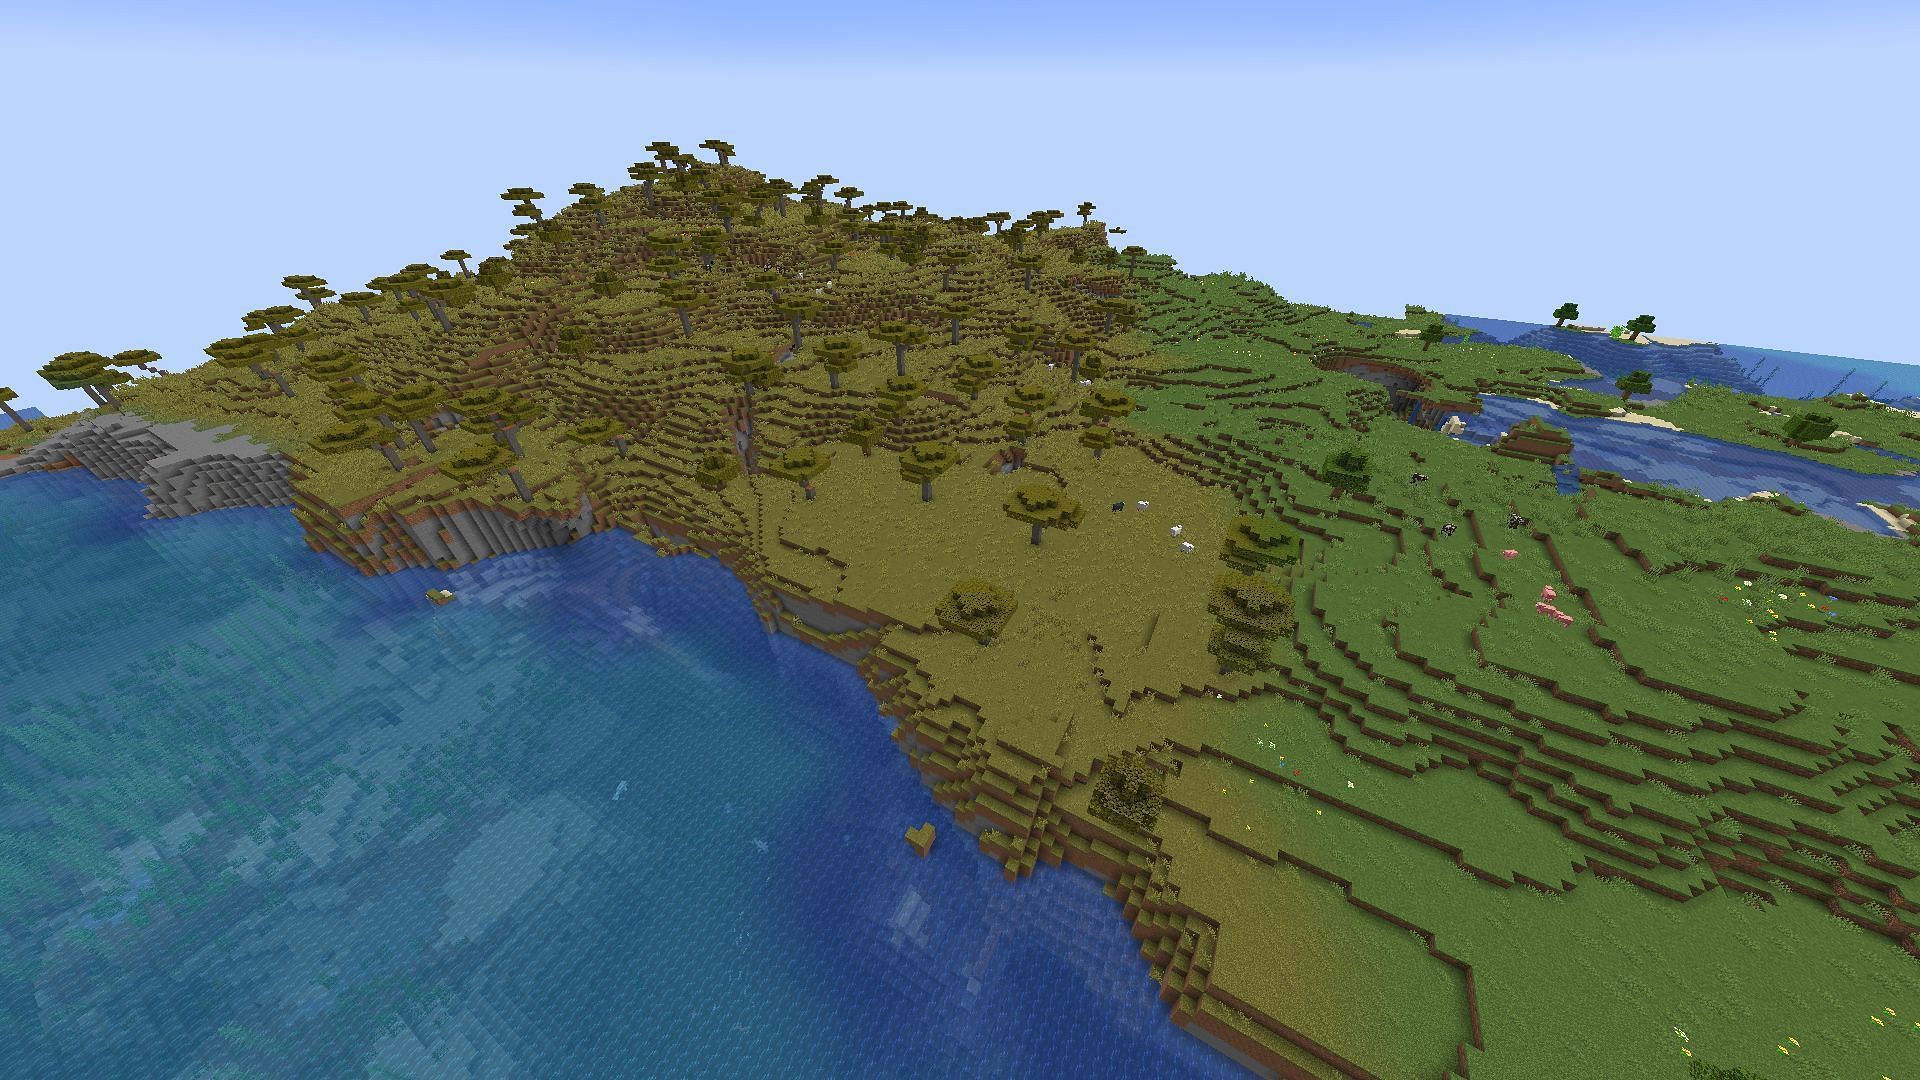 The island is slightly far from the spawn location, but it can be a great place for beginners (Image via Mojang)